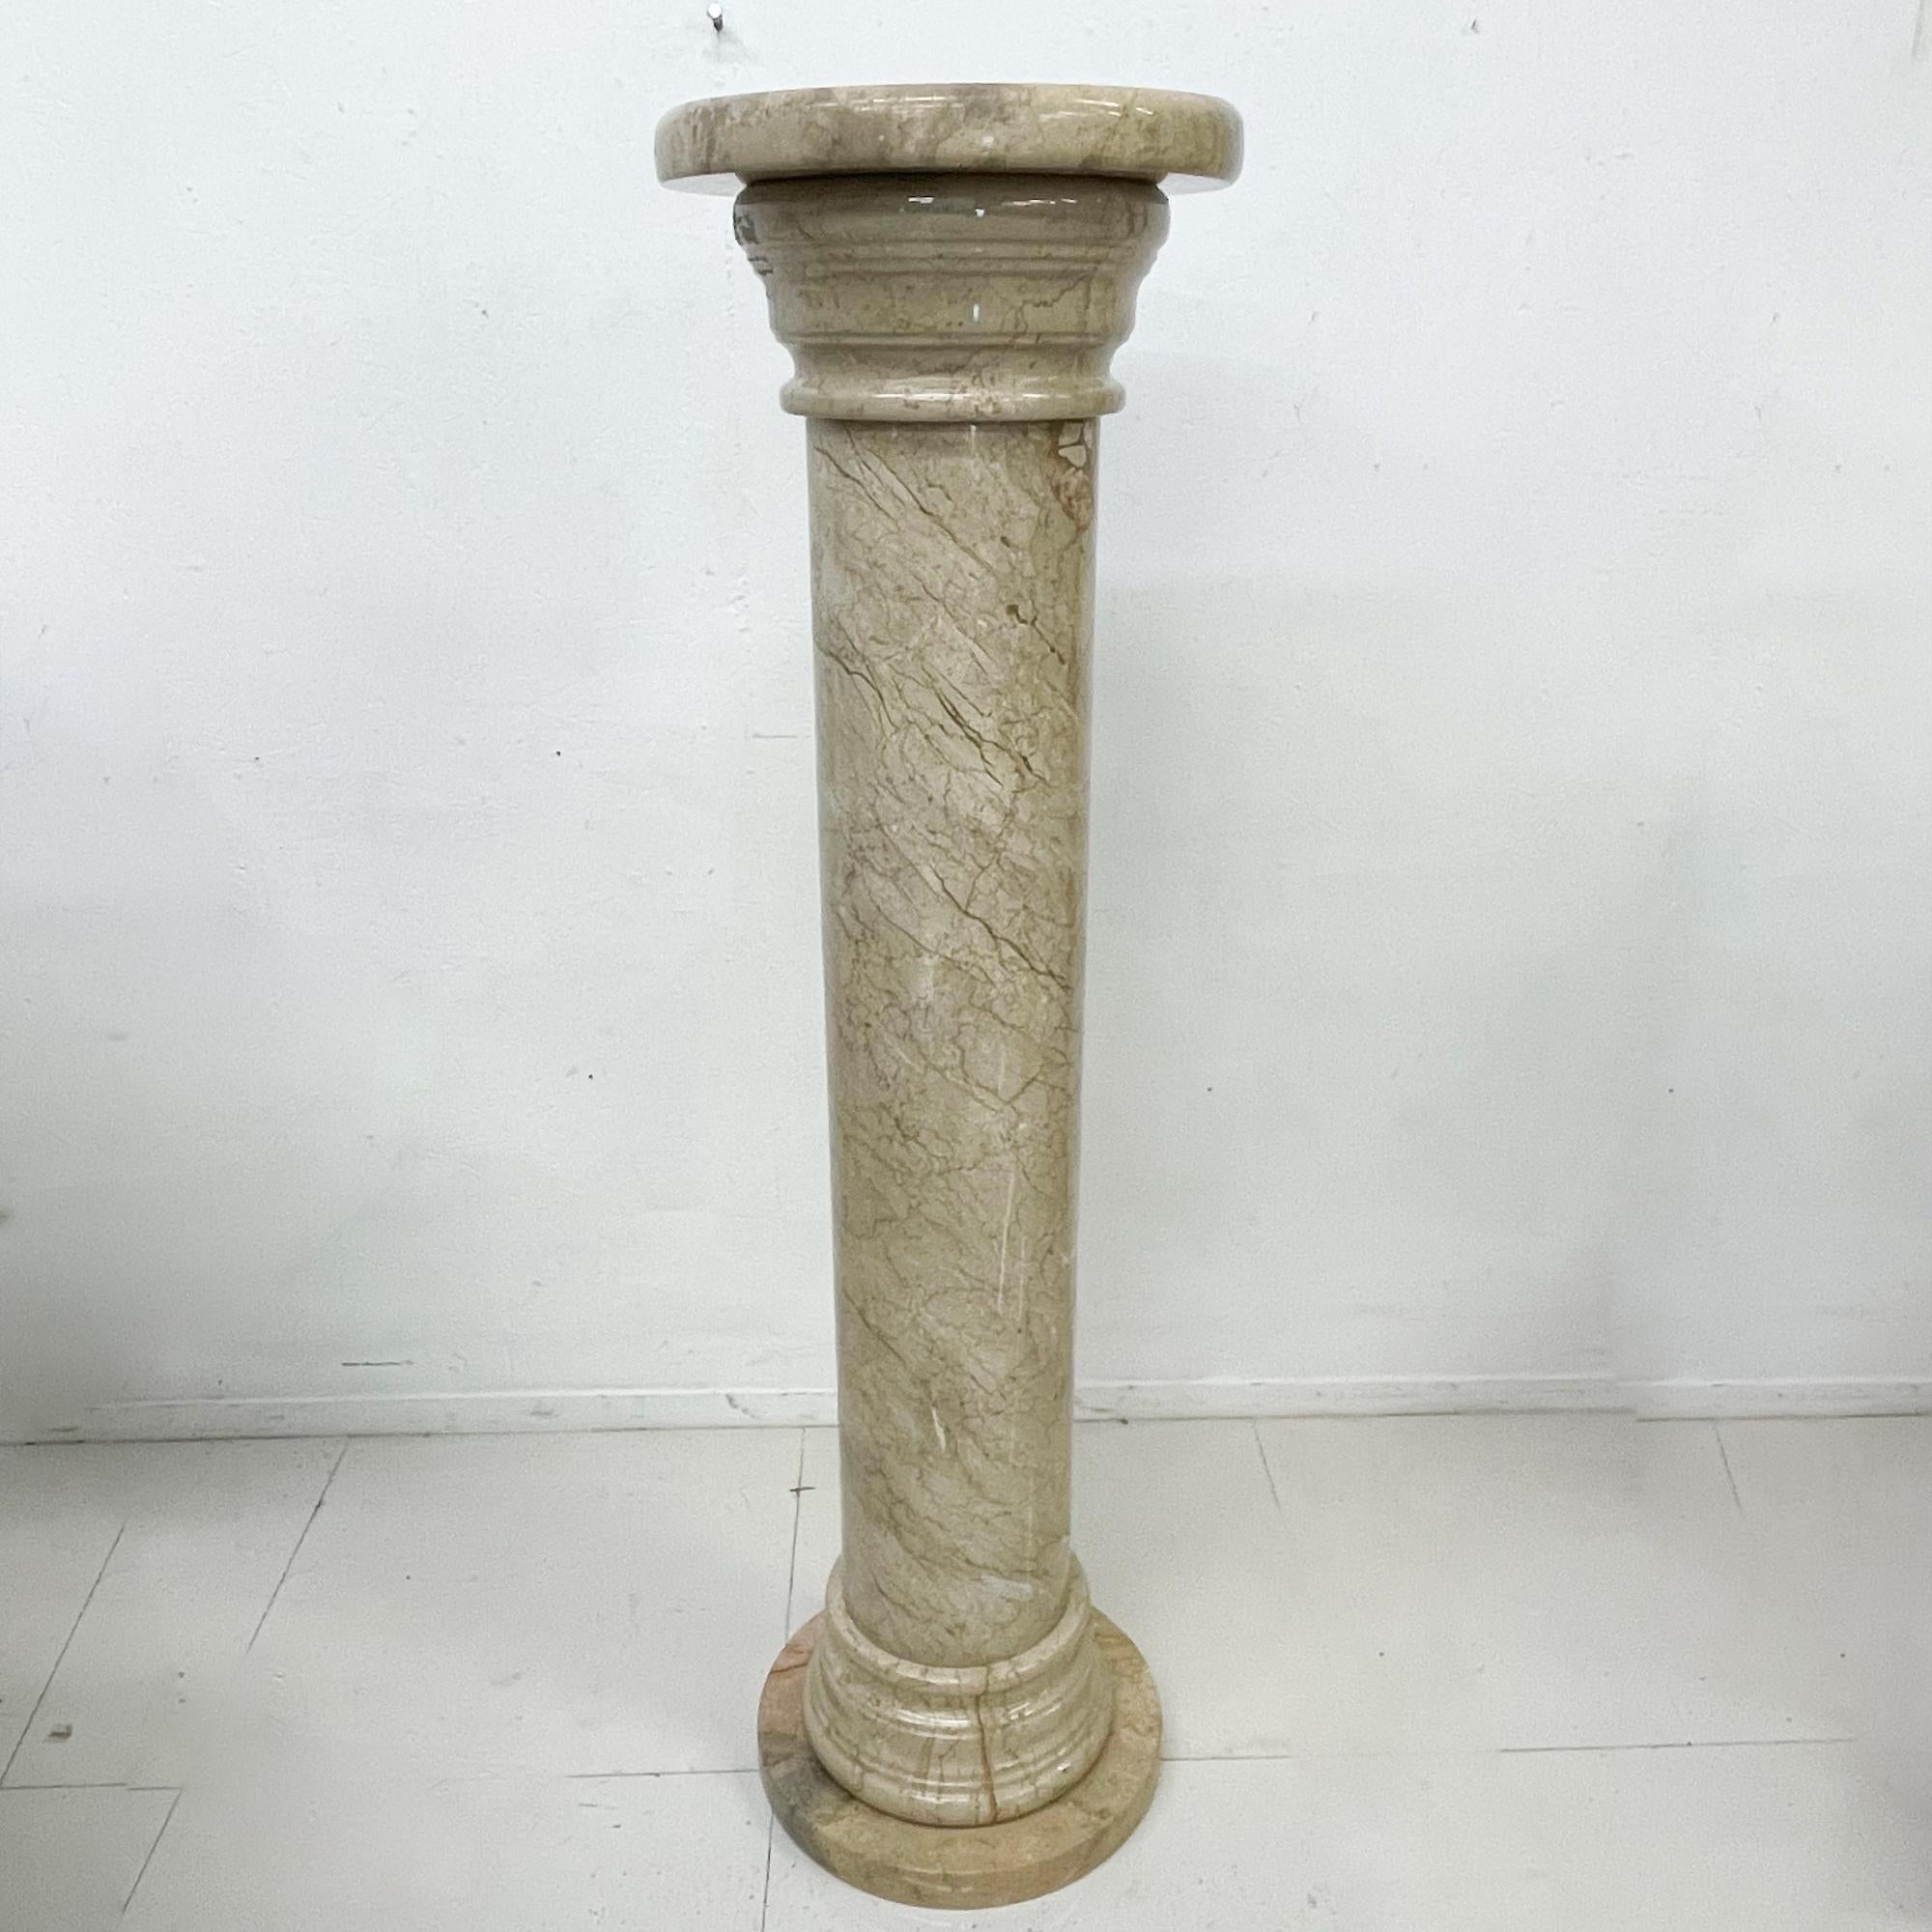 Stone Pedestal
1980s Post Modern Maitland Smith Stone pedestal Column in warm beige with round plinth base. 
Polished Marbled Stone Pedestal attributed to Maitland Smith style of Karl Springer 
Unmarked.
60.25 Tall x 16.75 in diameter